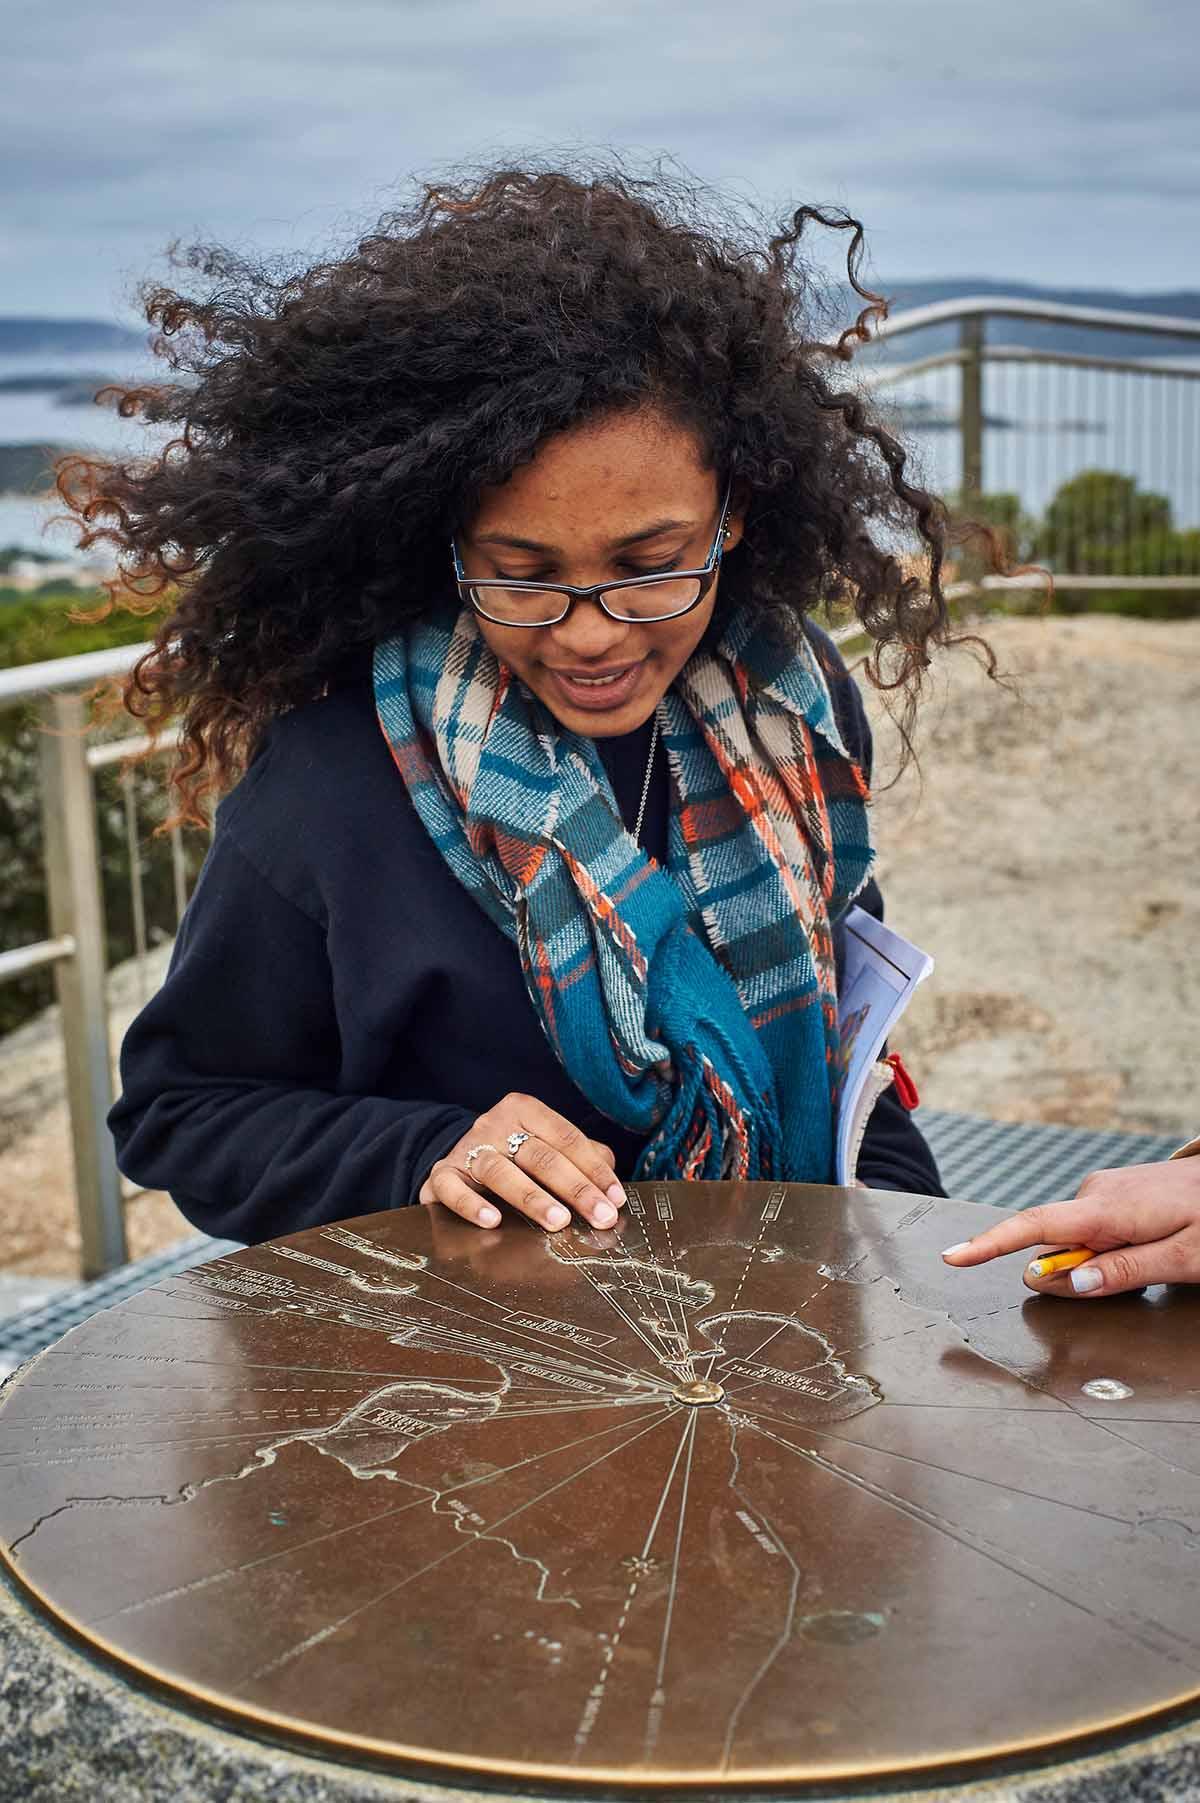 Student examines a brass map marker at a scenic overlook in Australia The Department of Geography co-sponsors, with the Environmental Studies Program, a semester-long study group at the University of Wollongong (UoW) in Australia during both the  fall and spring semesters.